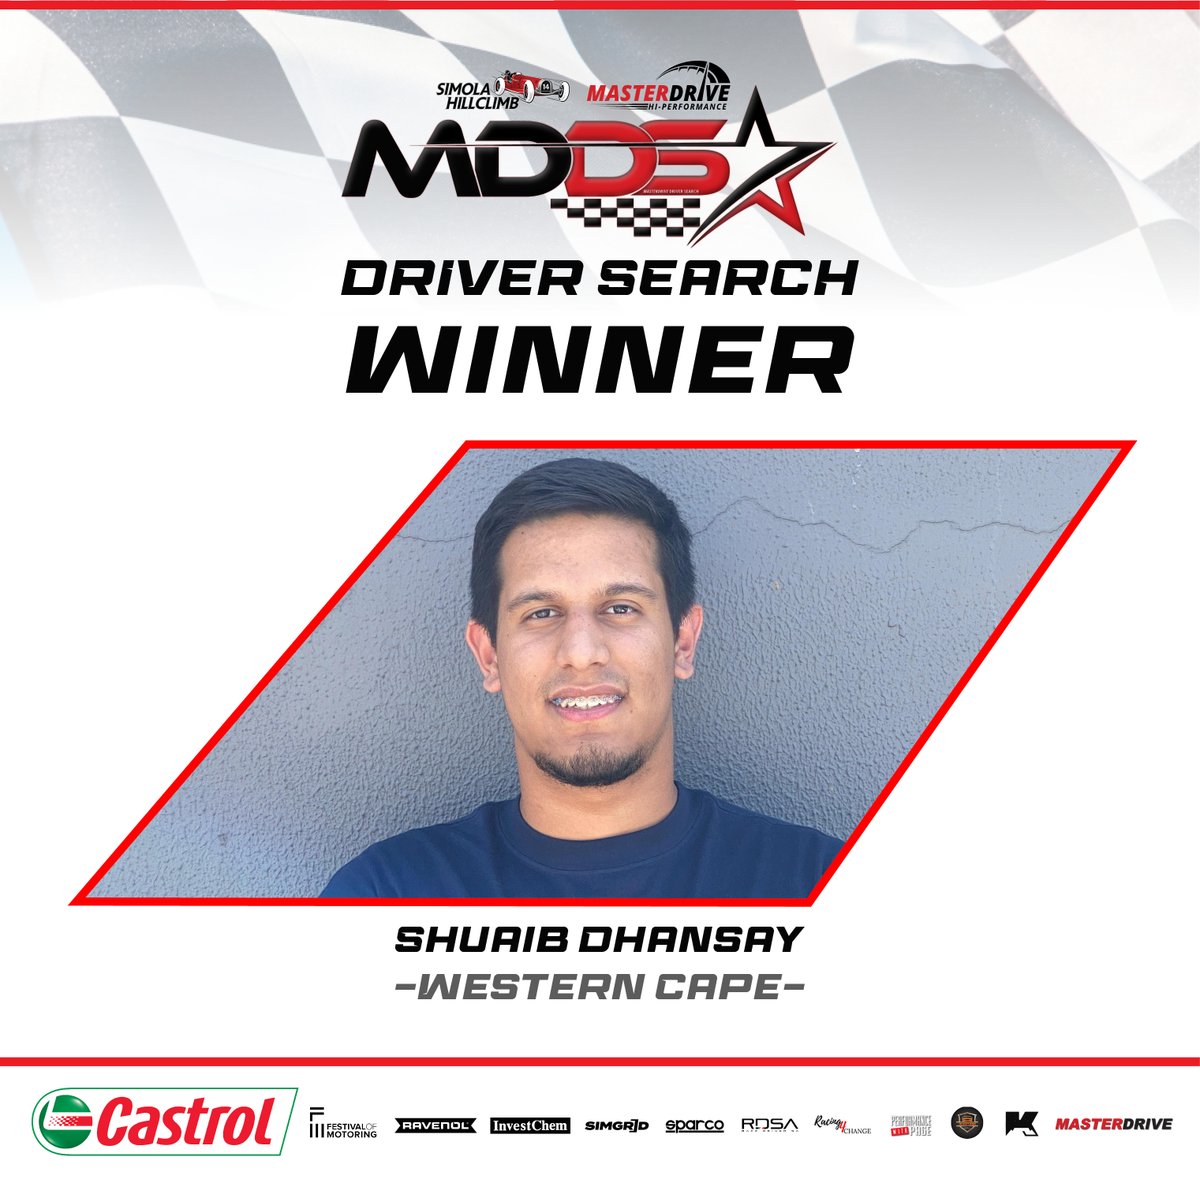 🏆🎉 We have a WINNER! 🎉🏆

🌟 Congratulations to Shuaib Dhansay for securing the top spot in the MasterDrive Simola Hillclimb Driver Search Competition! 🚗💨 Your talent and dedication have truly shone through, and we couldn't be prouder to have you as our champion!